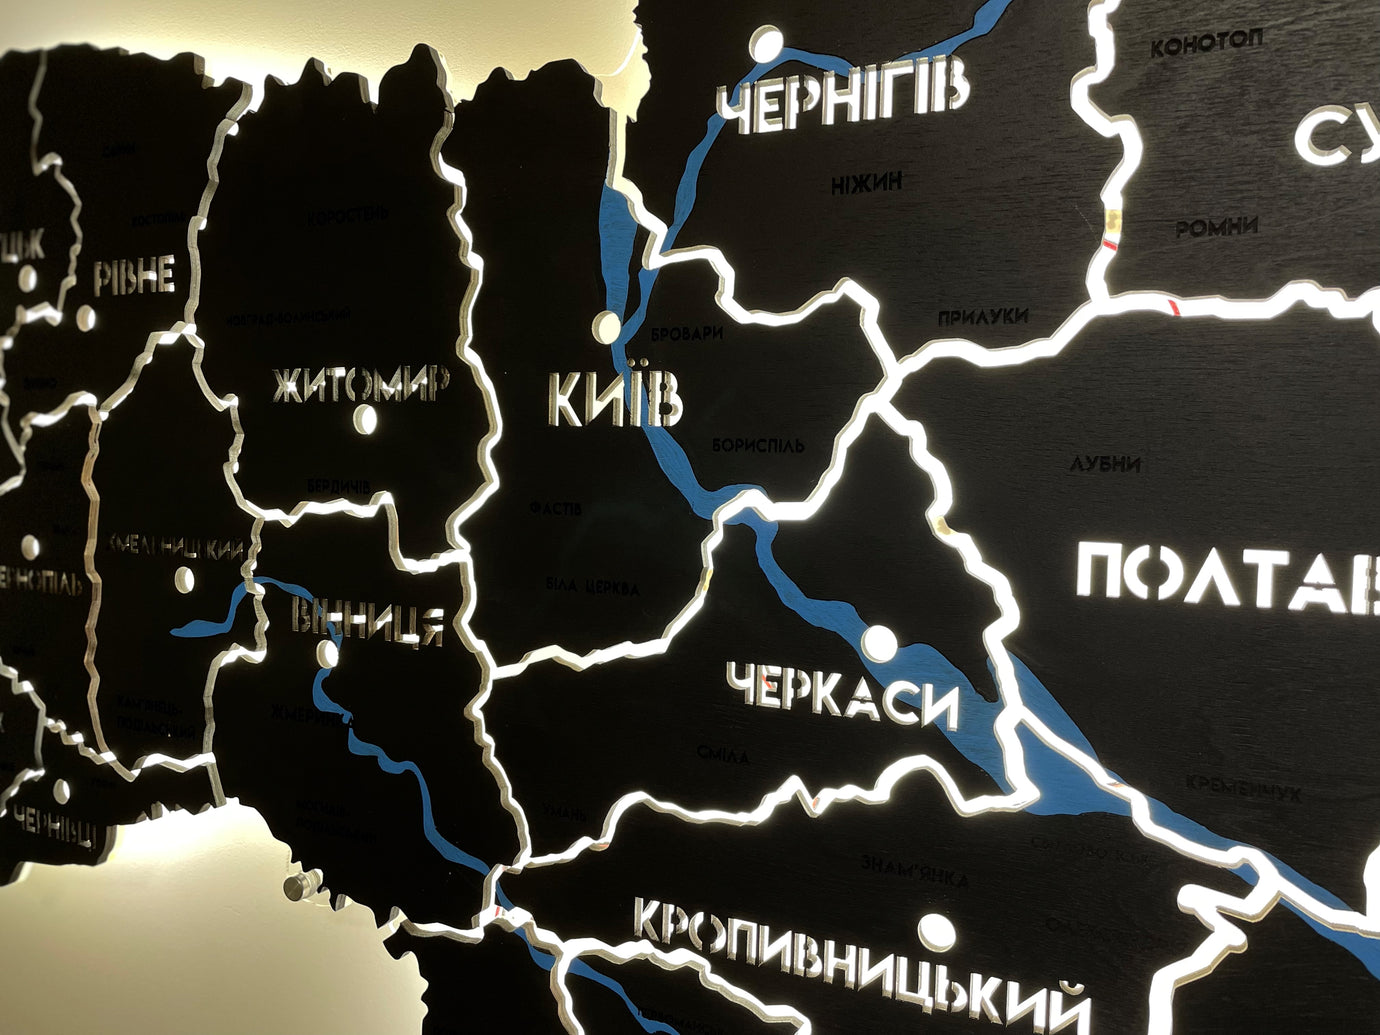 Ukraine LED map on acrylic glass with rivers and backlighting  between regions color Black